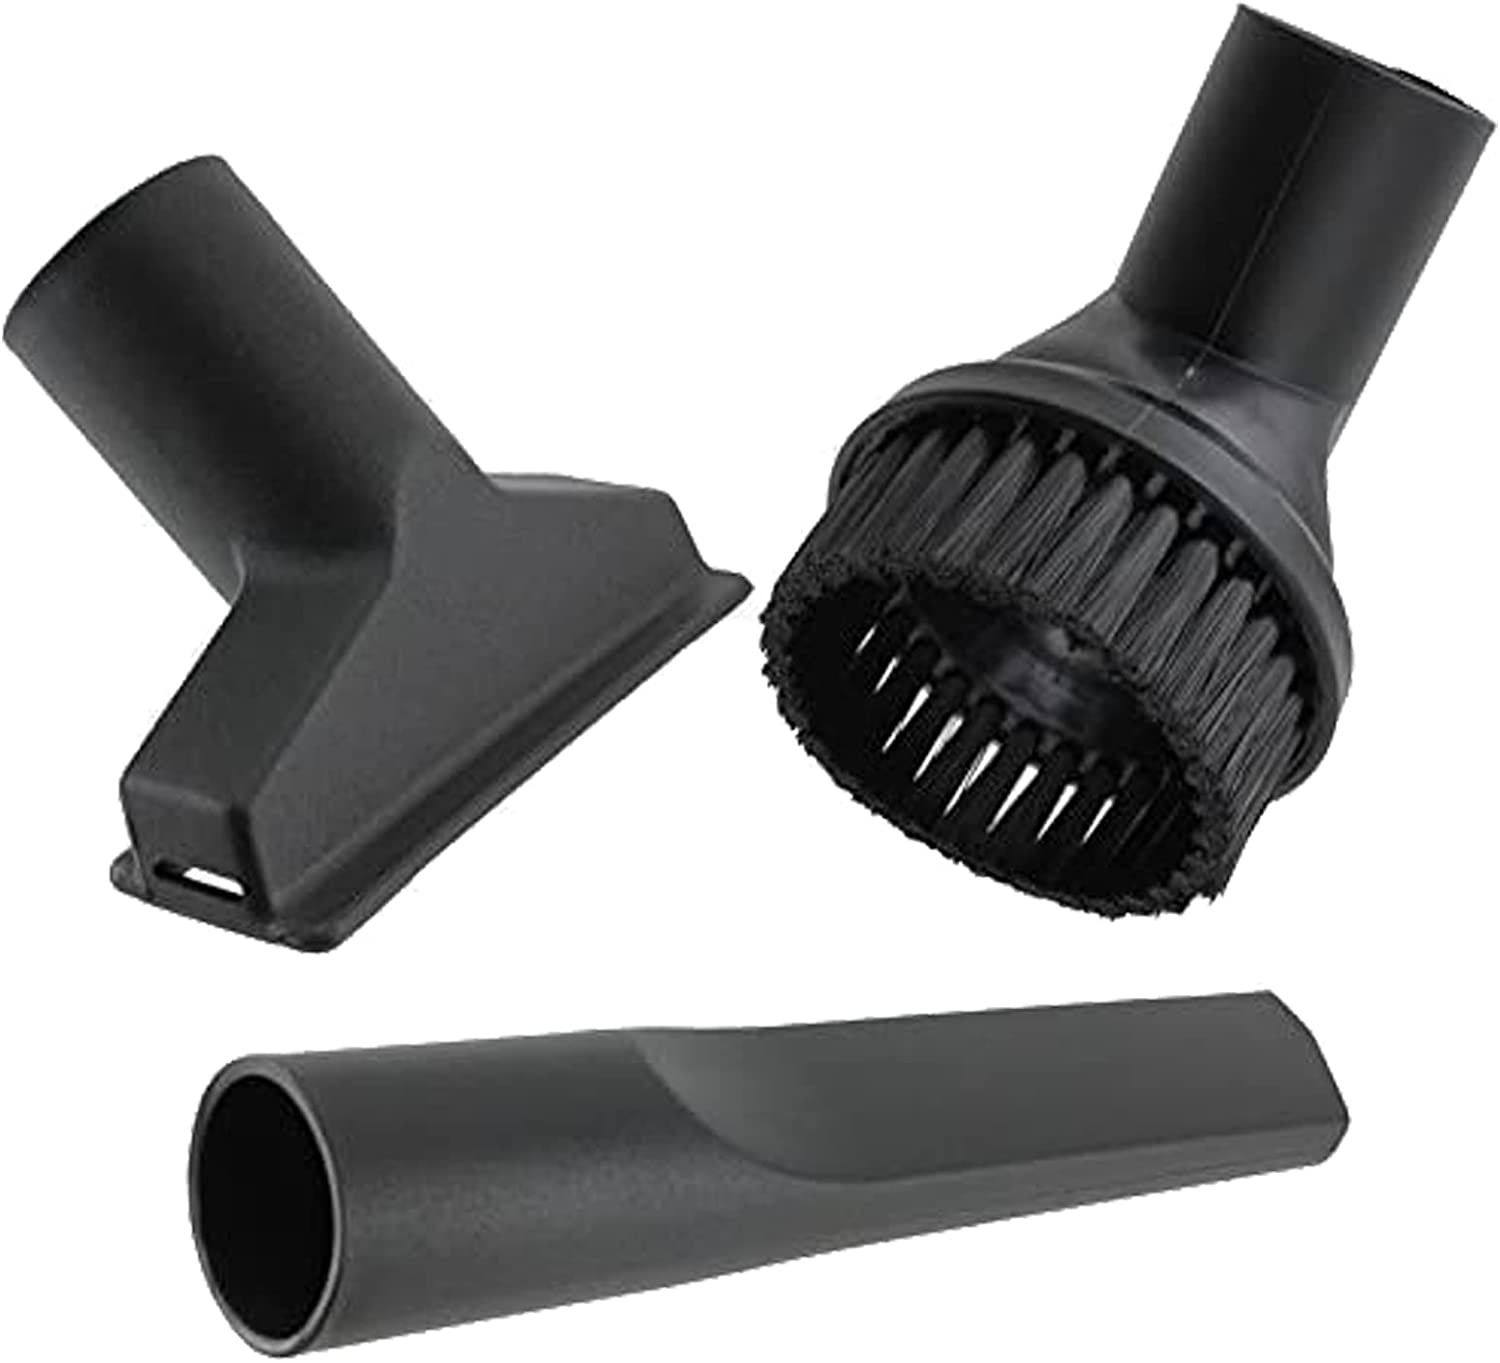 Mini Tool Cleaning Nozzle Kit for Shark Vacuum Cleaners (35mm)